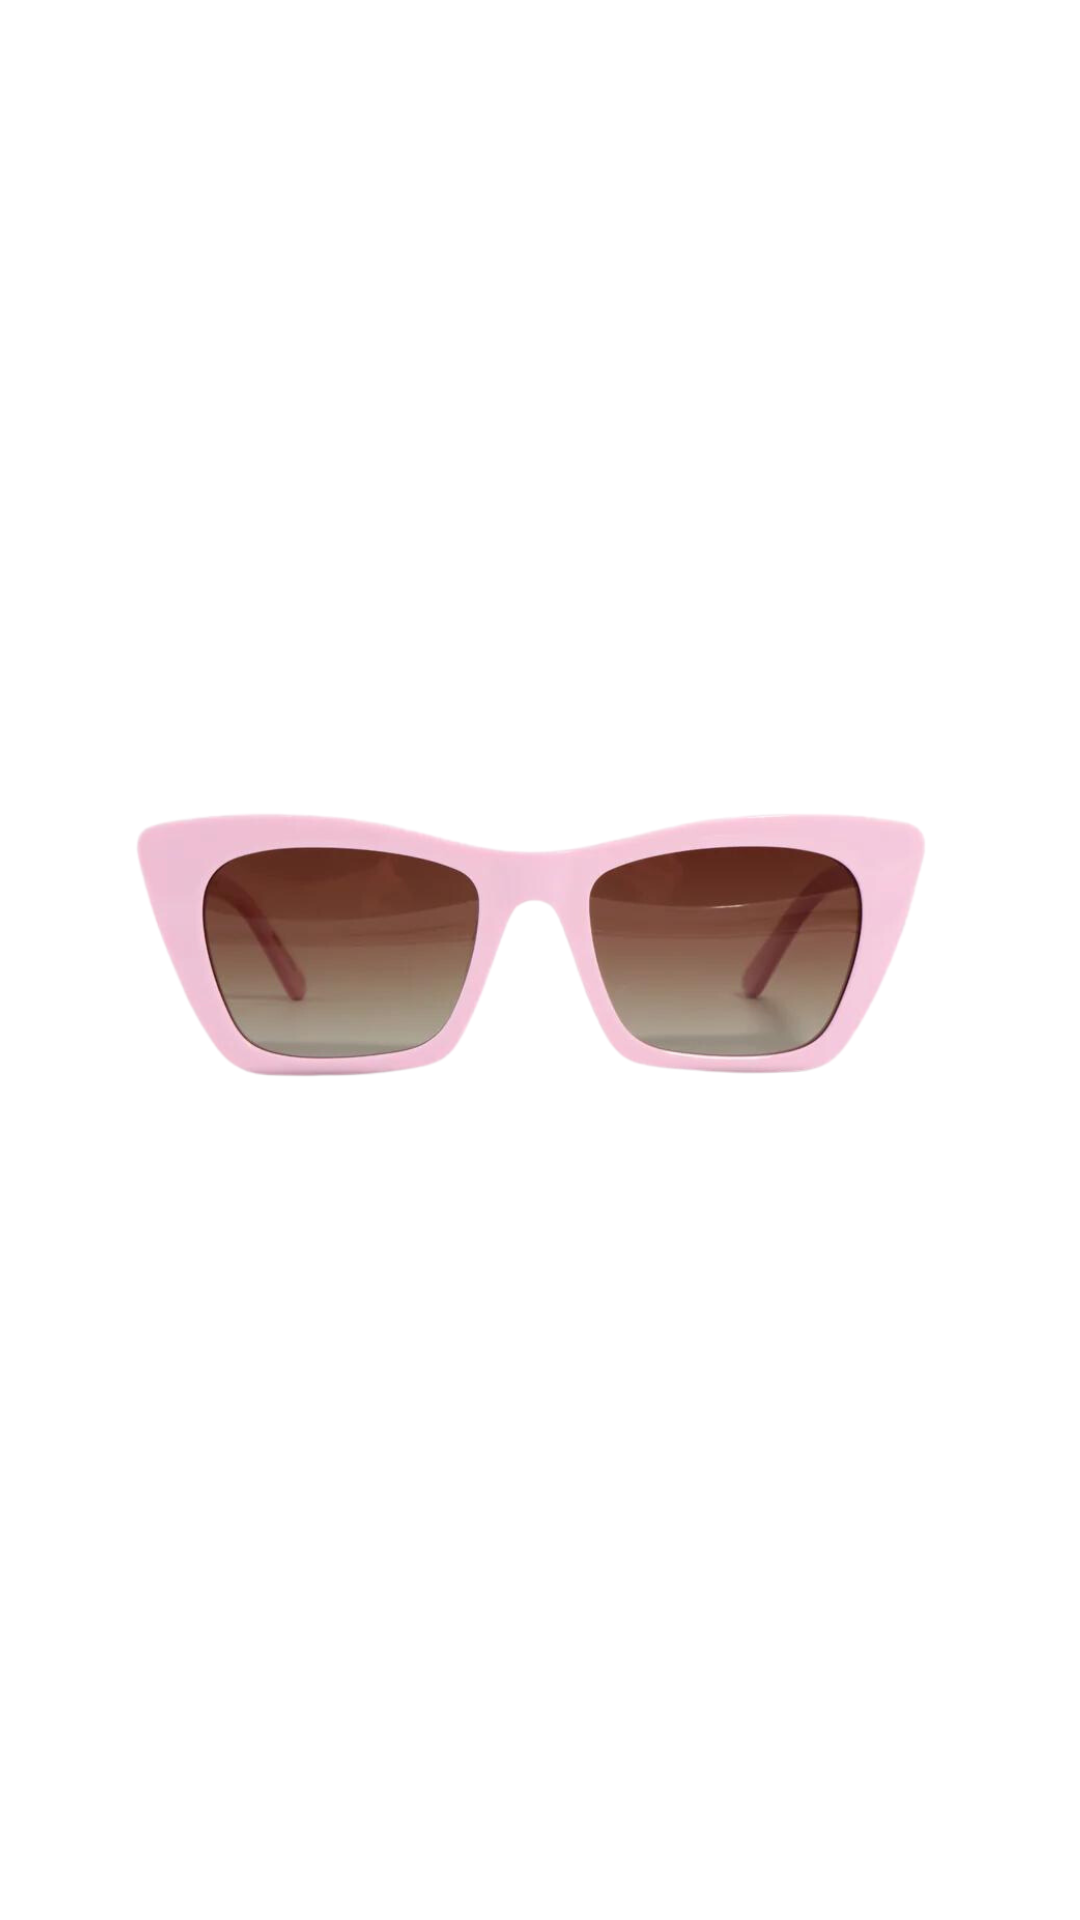 Lil’ Words x “SEE THE GOOD” Sunglasses